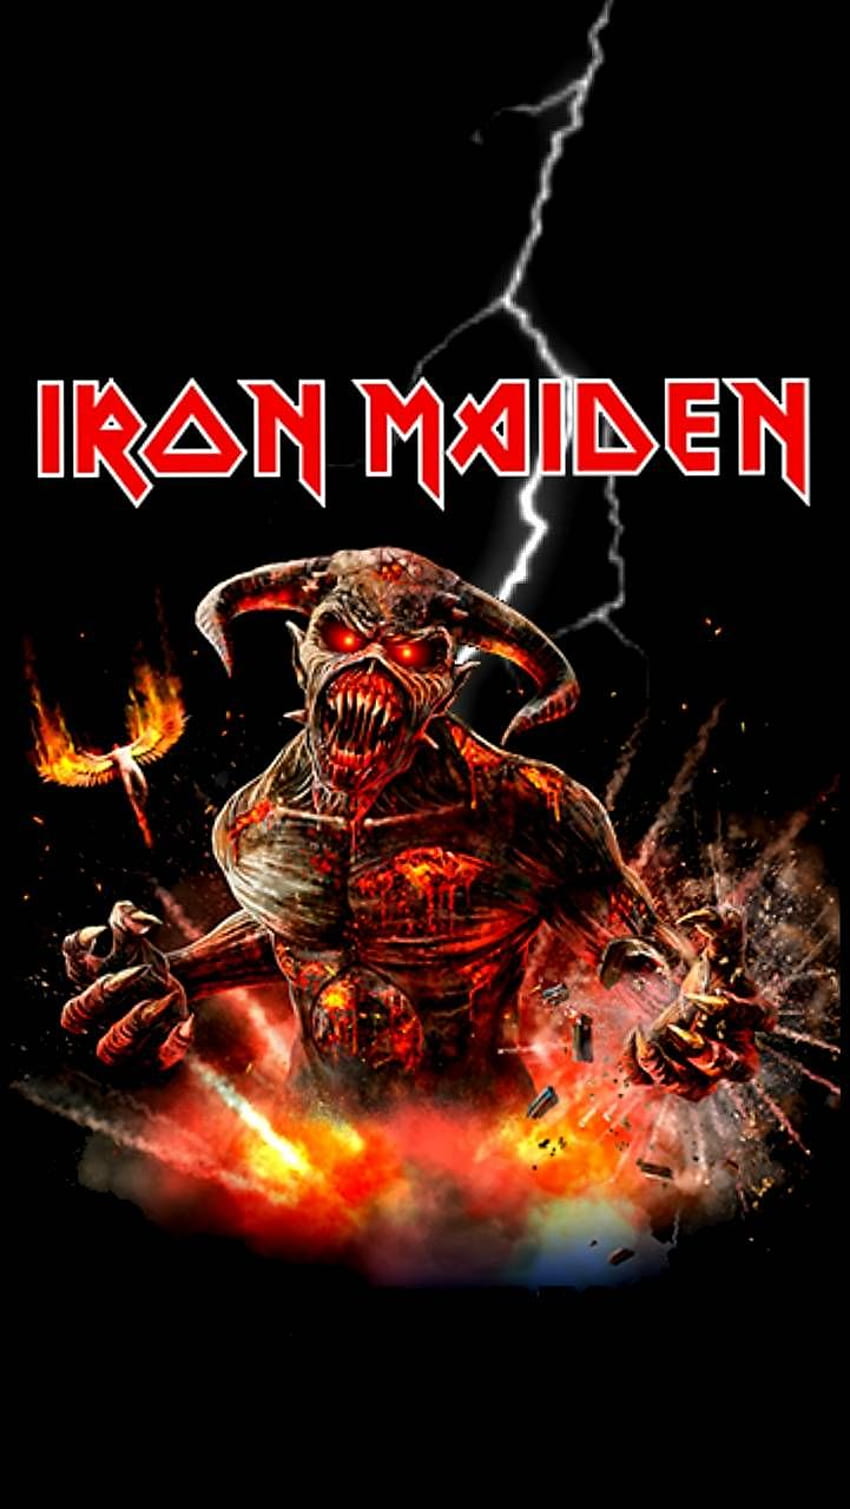 Iron Maiden by Crooklynite - dd now. Browse millions of popular band ...